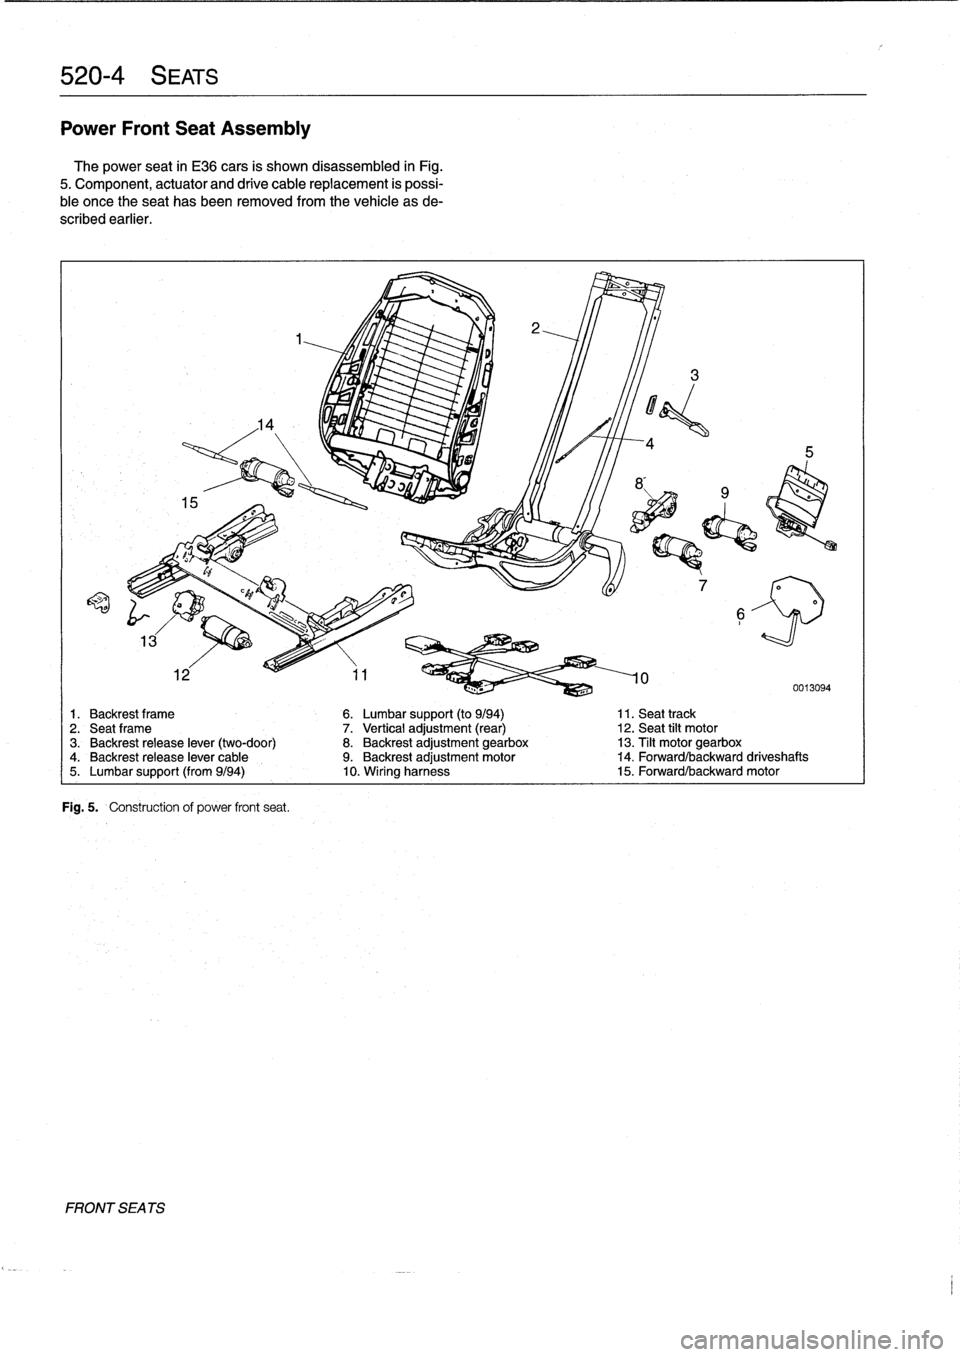 BMW 328i 1995 E36 Owners Manual 
520-
4
SEATS

Power
Front
Seat
Assembly
The
power
seat
in
E36
cars
is
shown
disassembled
in
Fig
.

5
.
Component,
actuator
and
drive
cable
replacement
is
possi-
ble
once
theseat
has
been
removed
from